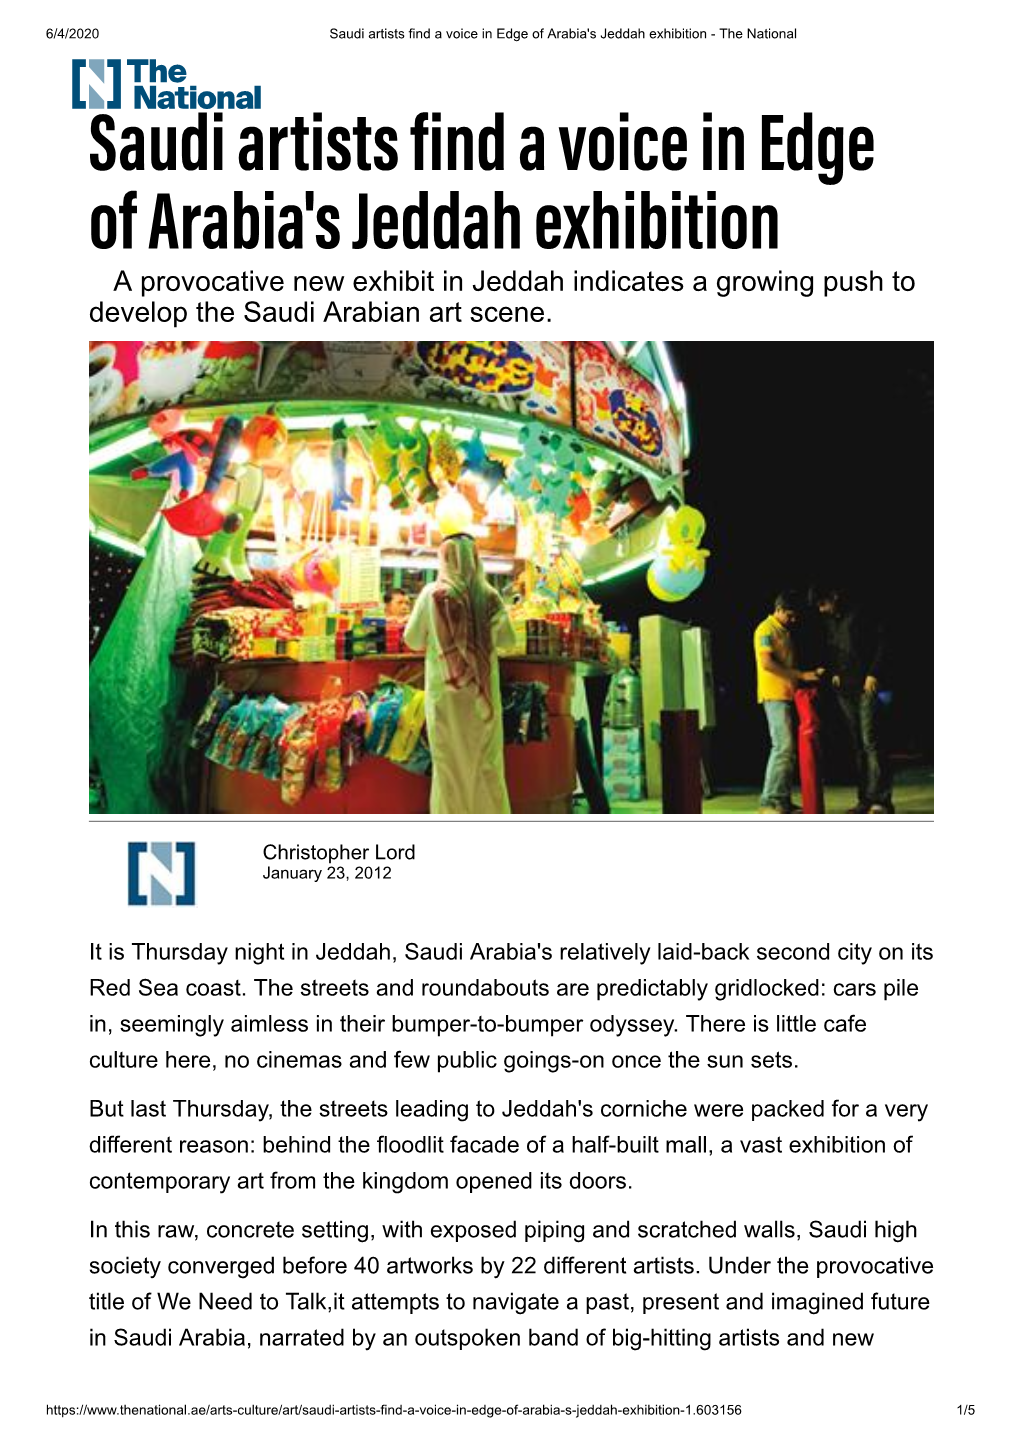 Saudi Artists Find a Voice in Edge of Arabia's Jeddah Exhibition